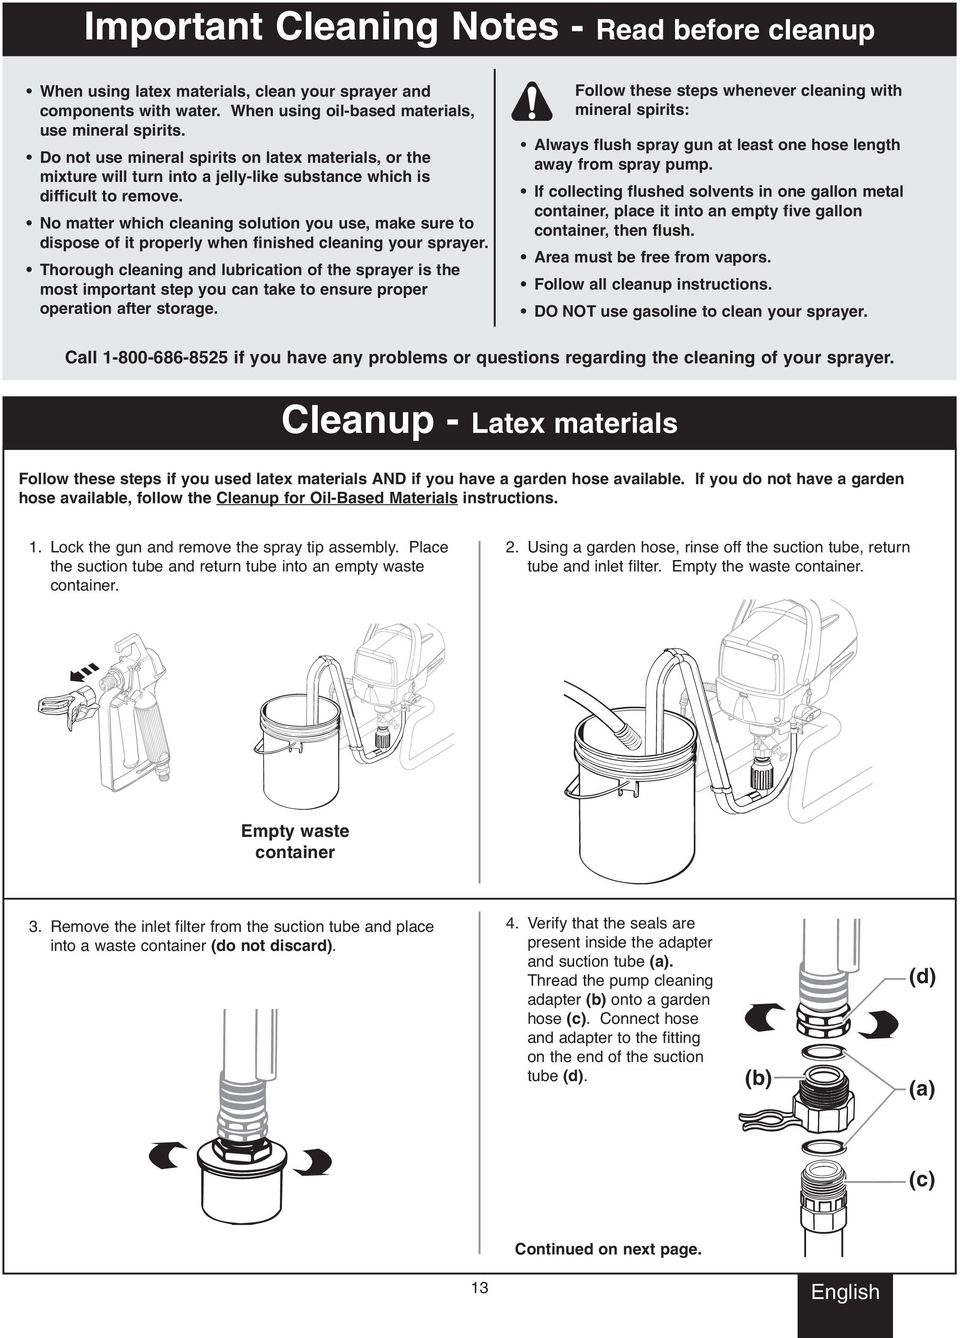 No matter which cleaning solution you use, make sure to dispose of it properly when finished cleaning your sprayer.